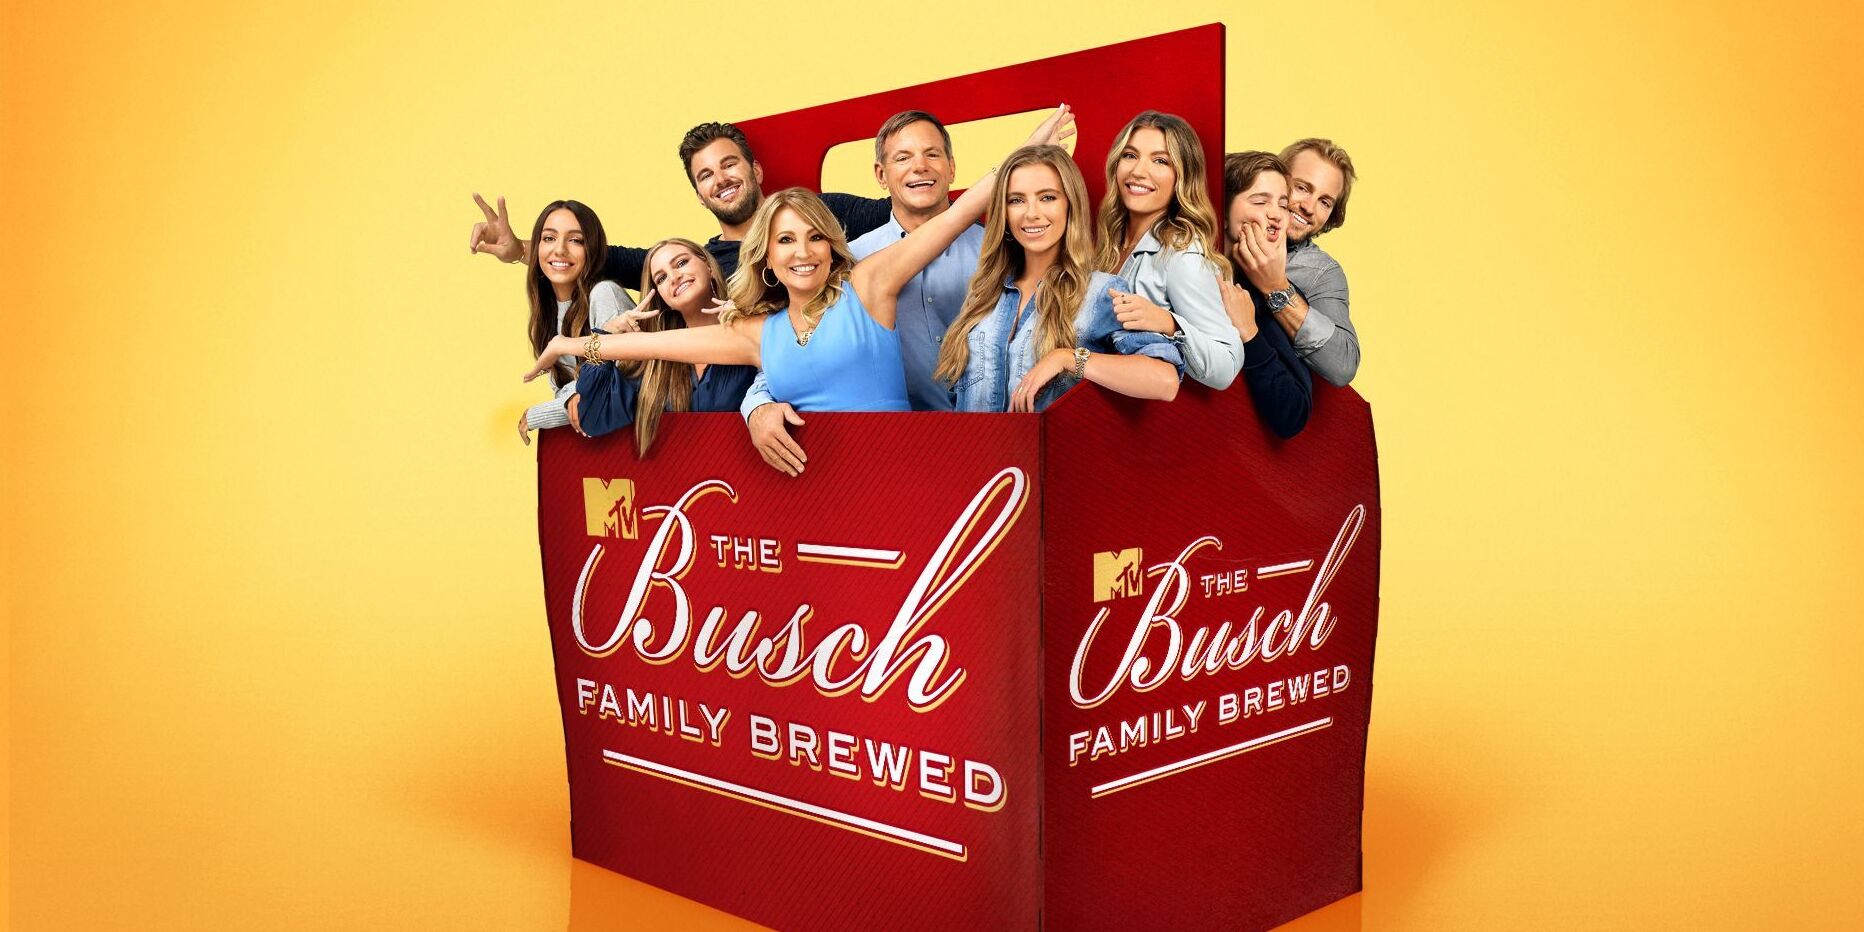 The Busch Family Brewed MTV